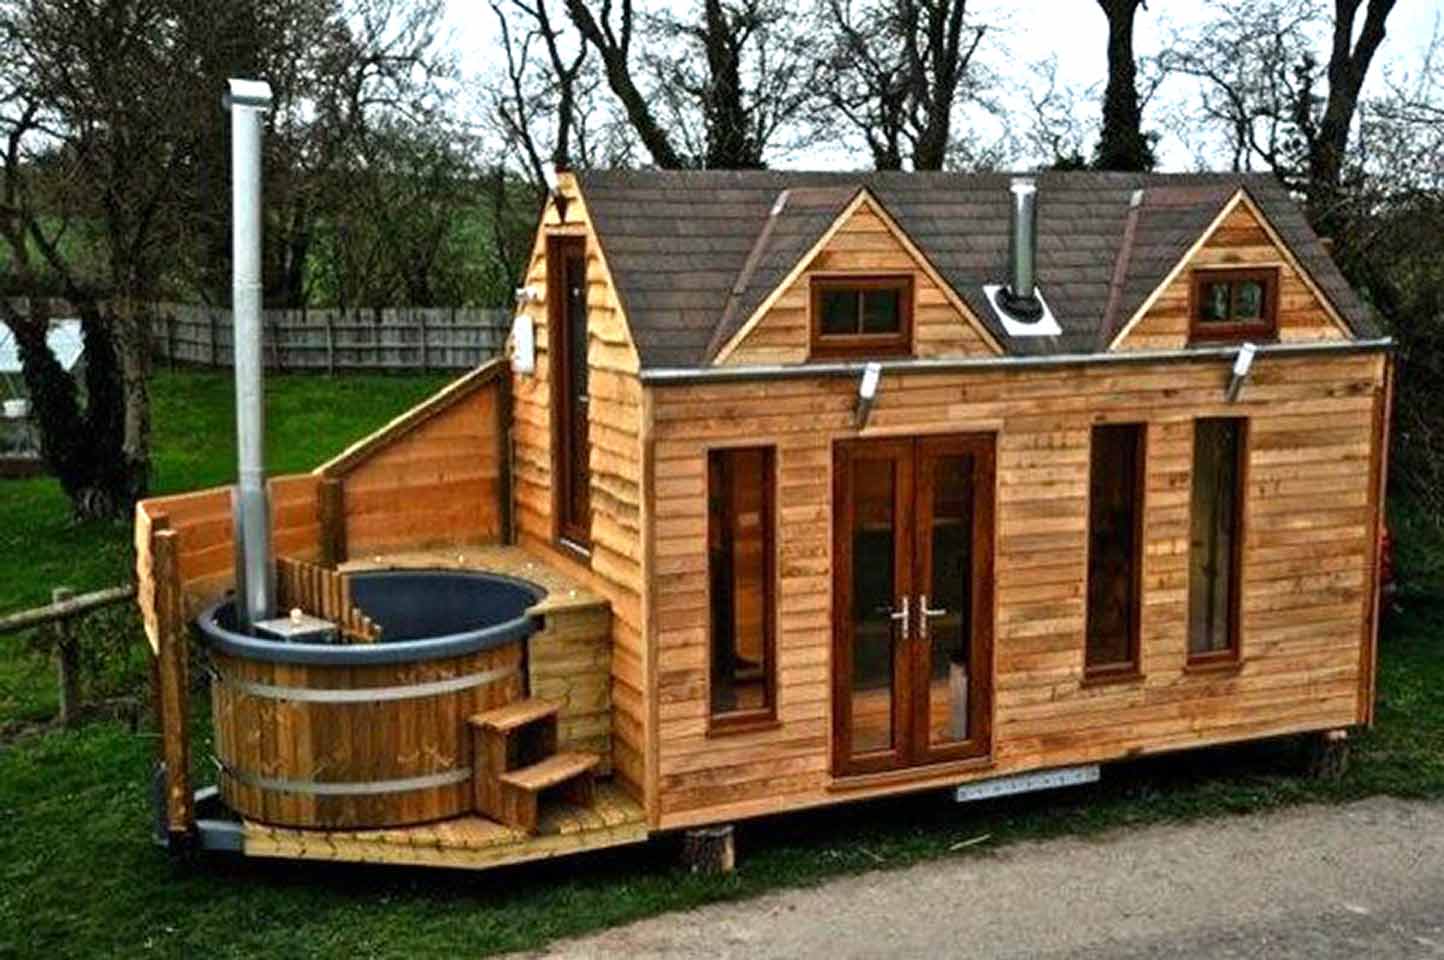  Blog: Tiny Cabin on Trailer with Outdoor Hot Tub Built In -- in UK